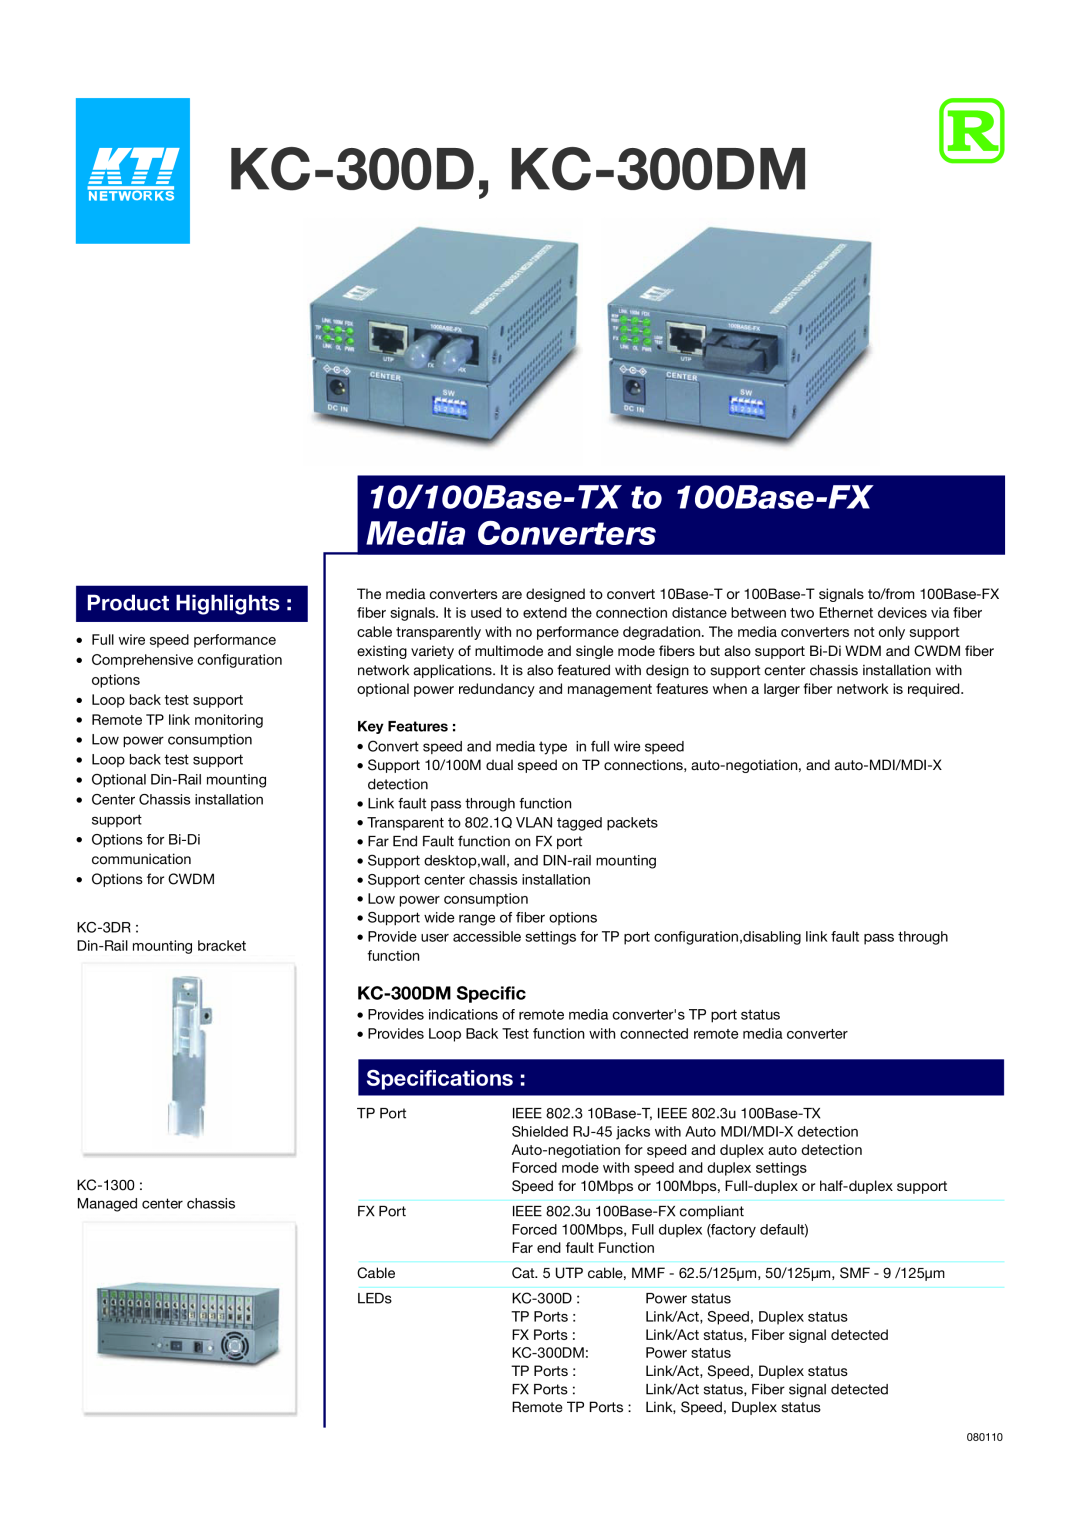 KTI Networks specifications Product Highlights, Specifications, Key Features, KC-300D, KC-300DM, KC-300DM Specific 